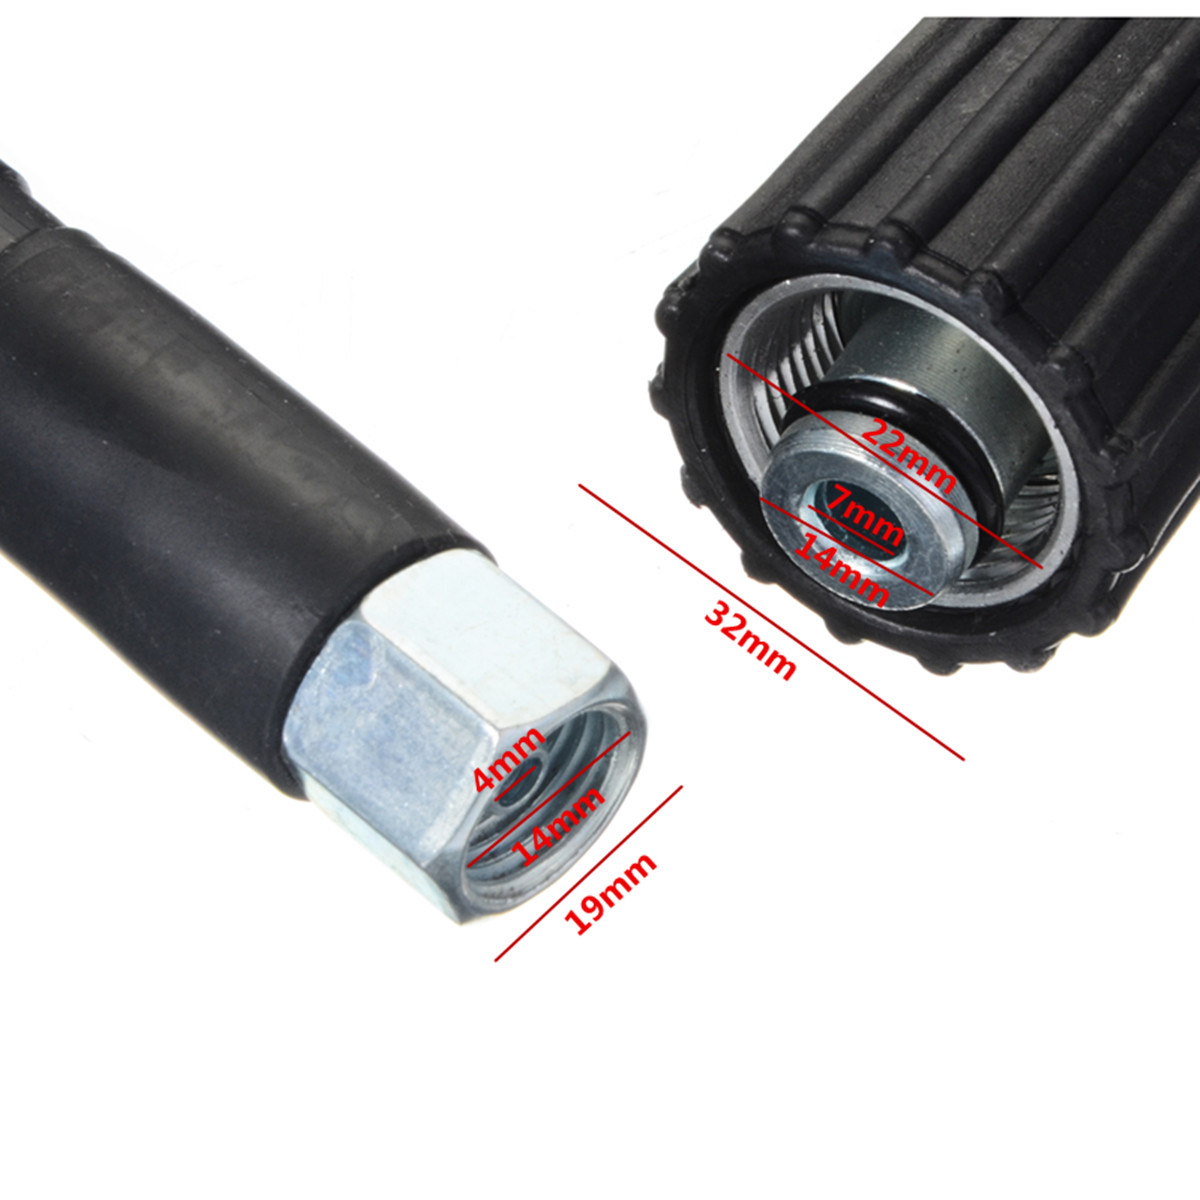 10 meters 5800PSI High Pressure Washer Hose Cord Pipe Car Cleaner Water Cleaning Extension Hose Water Hose M14 M22 Connector